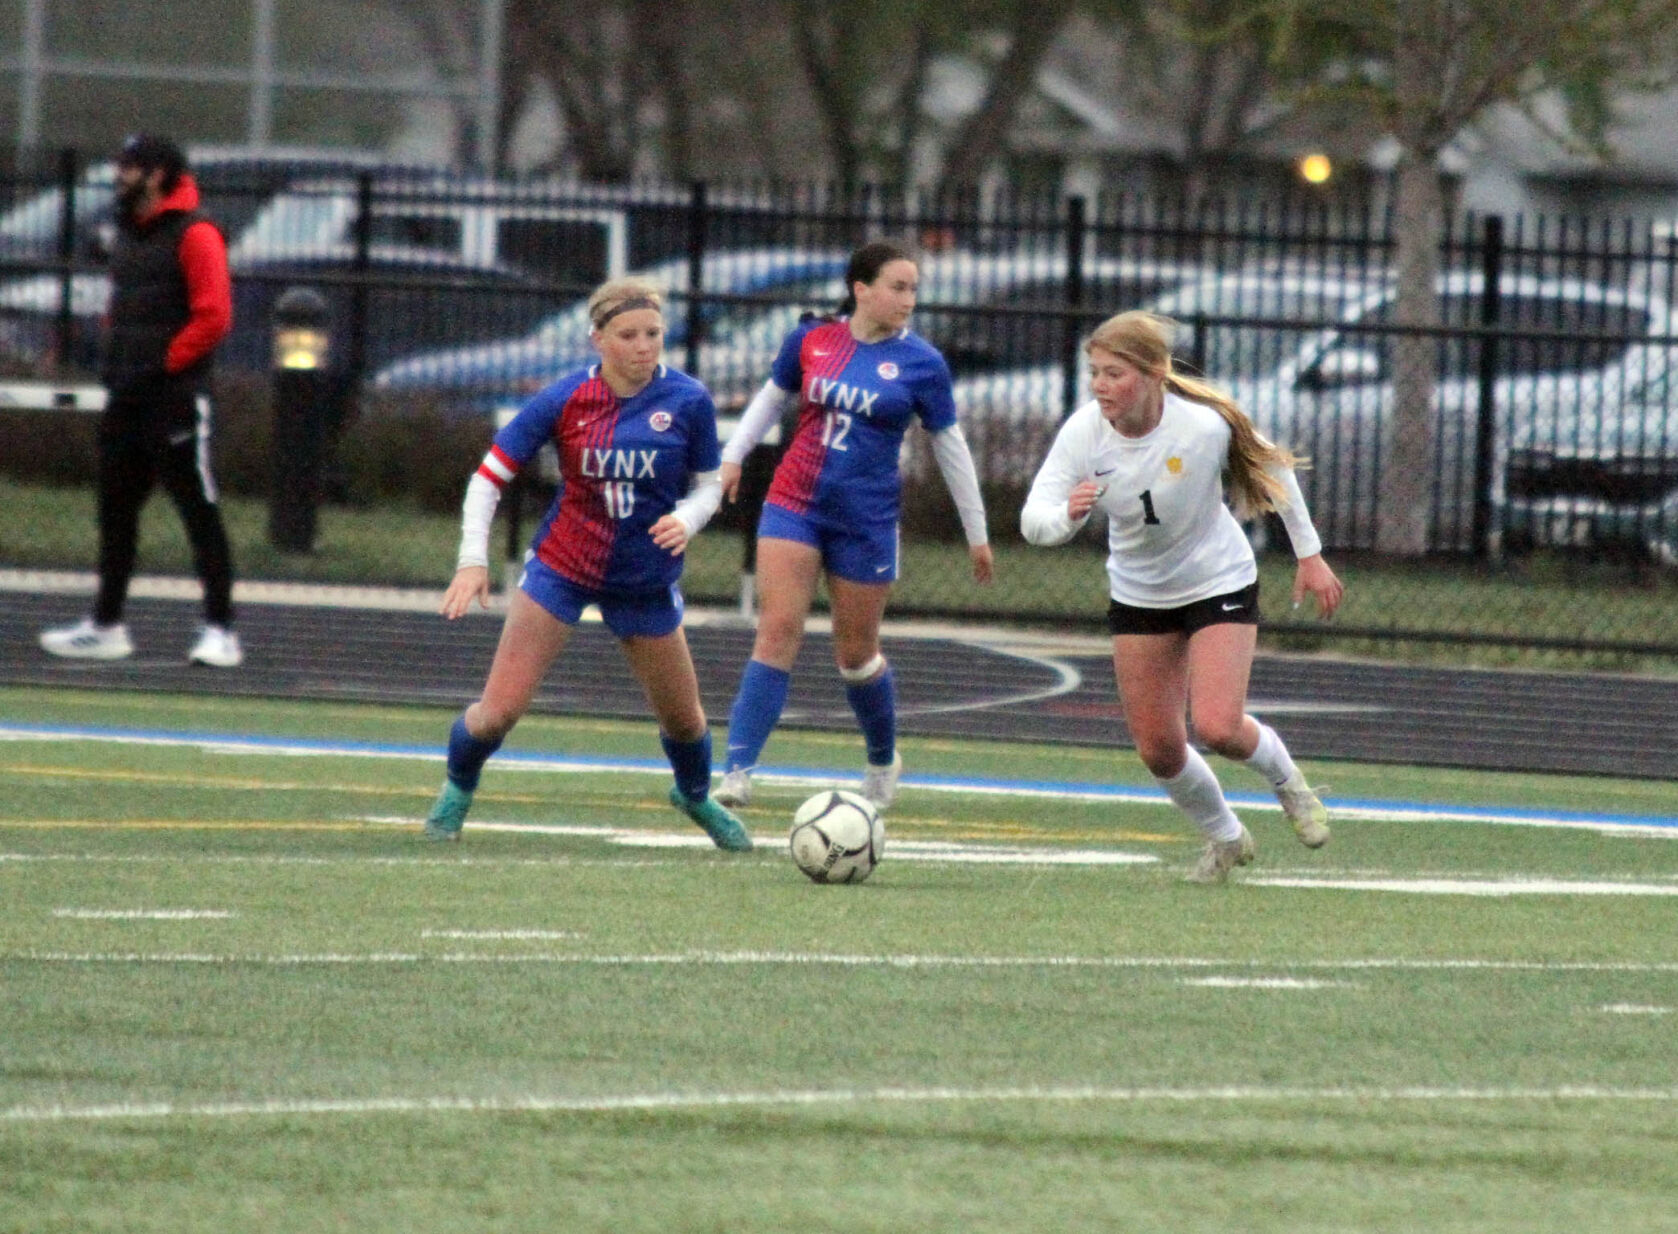 St. Albert secures 1-0 victory against Abraham Lincoln with early goal and strong defense